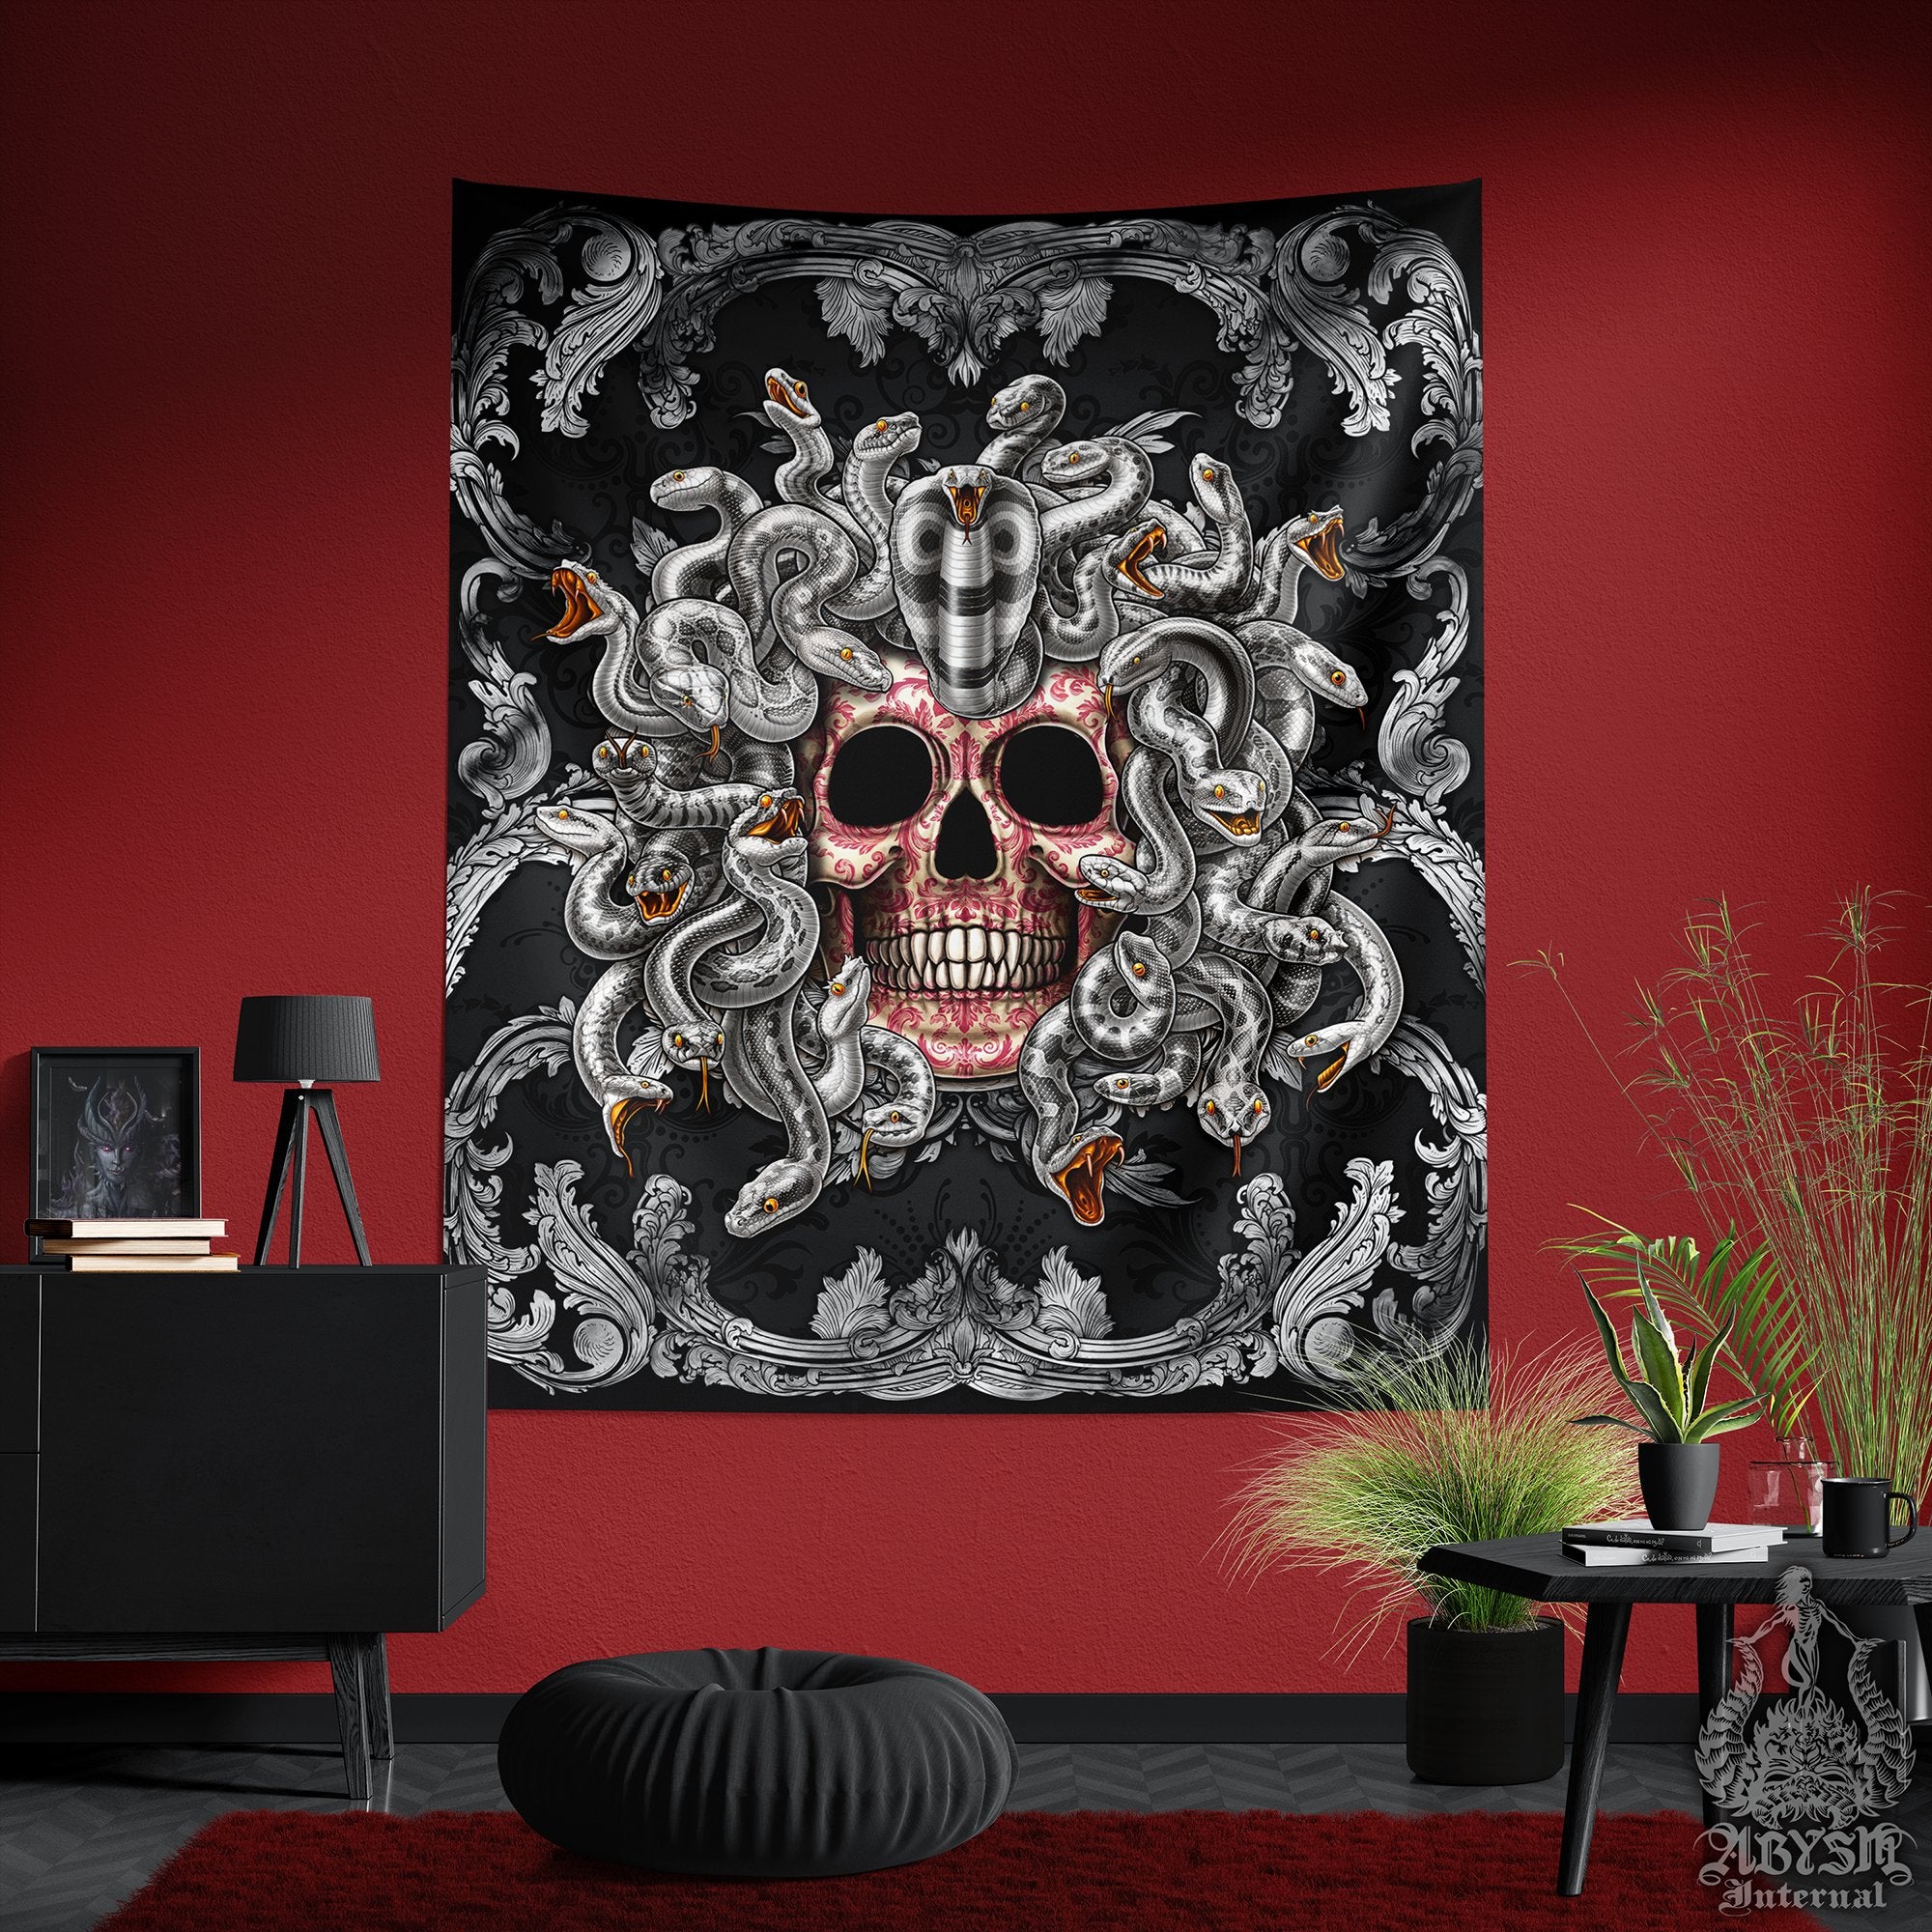 Medusa Tapestry, Baroque Wall Hanging, Goth Home Decor, Vertical Art Print - Silver Skull, 2 Faces - Abysm Internal